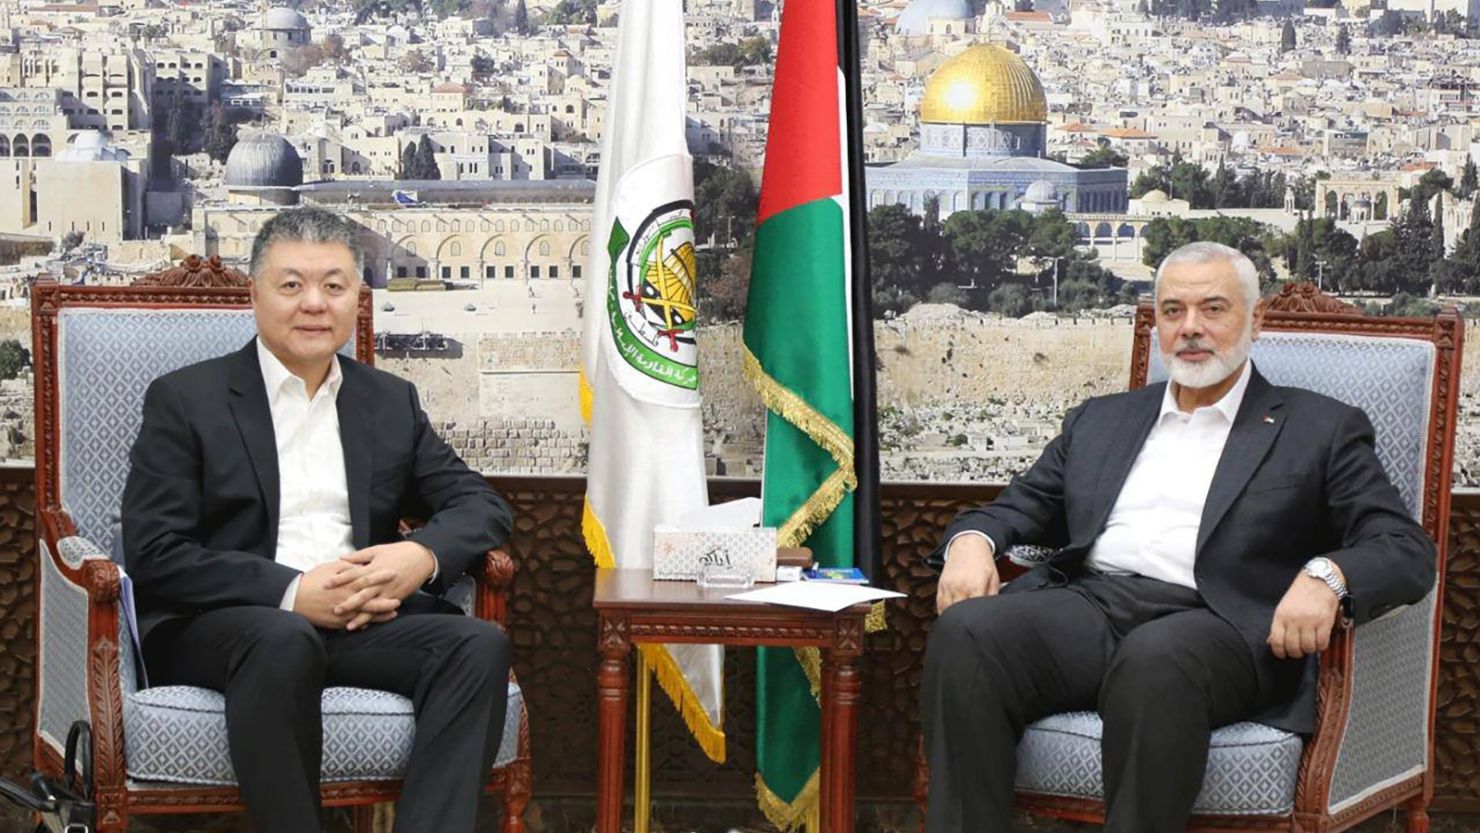 Chinese diplomat Wang Kejian met with Hamas political leader Ismail Haniyeh in Qatar on March 17.